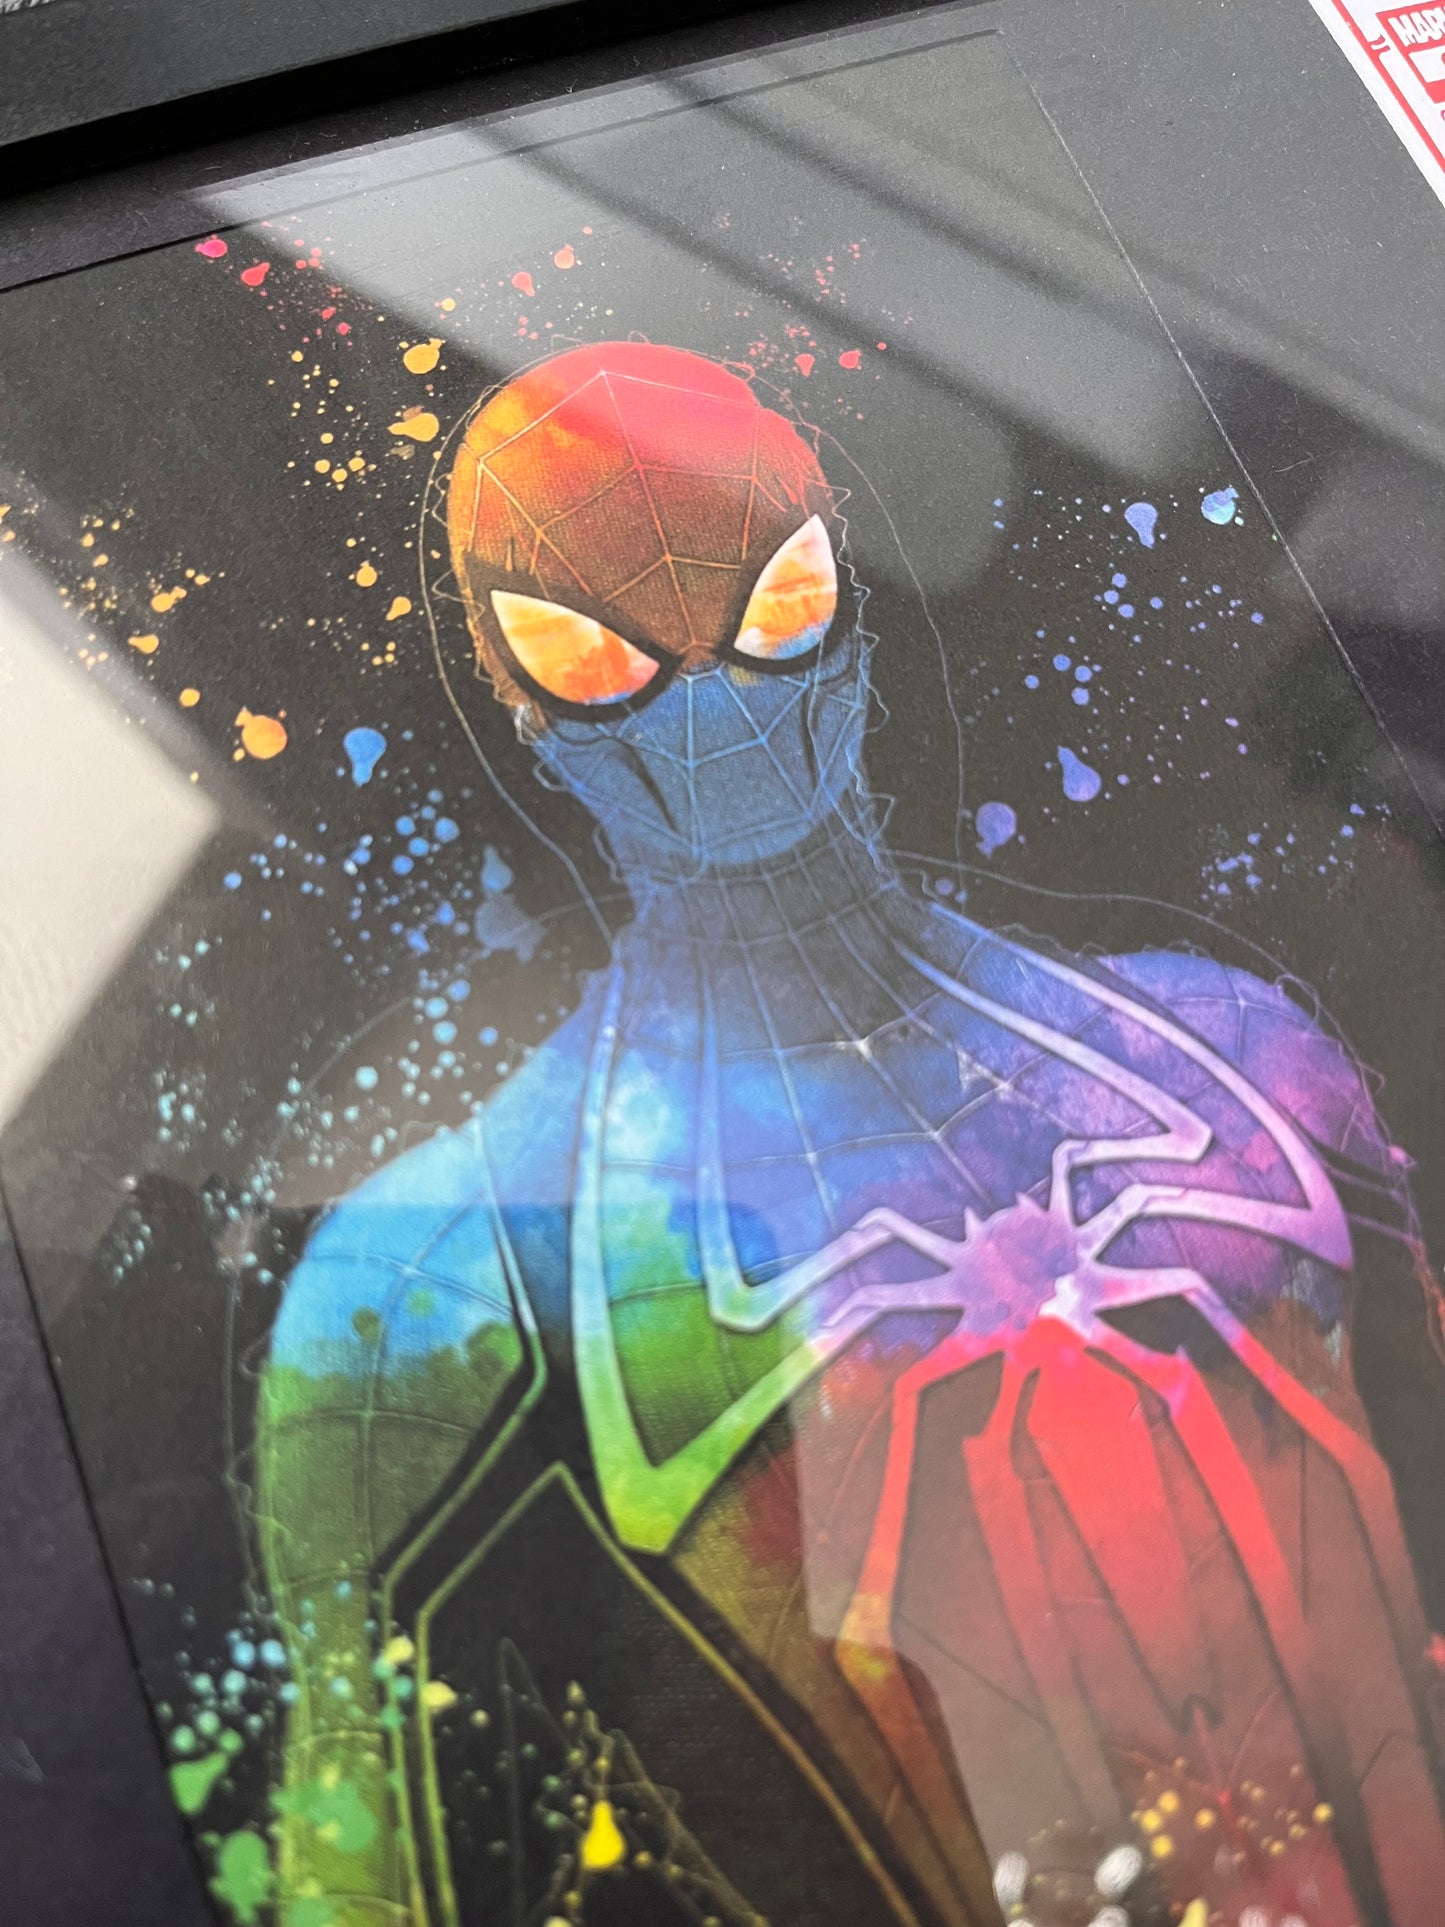 LIMITED EDITION, Spider-Man Picture & Foil Printed Comic Cover